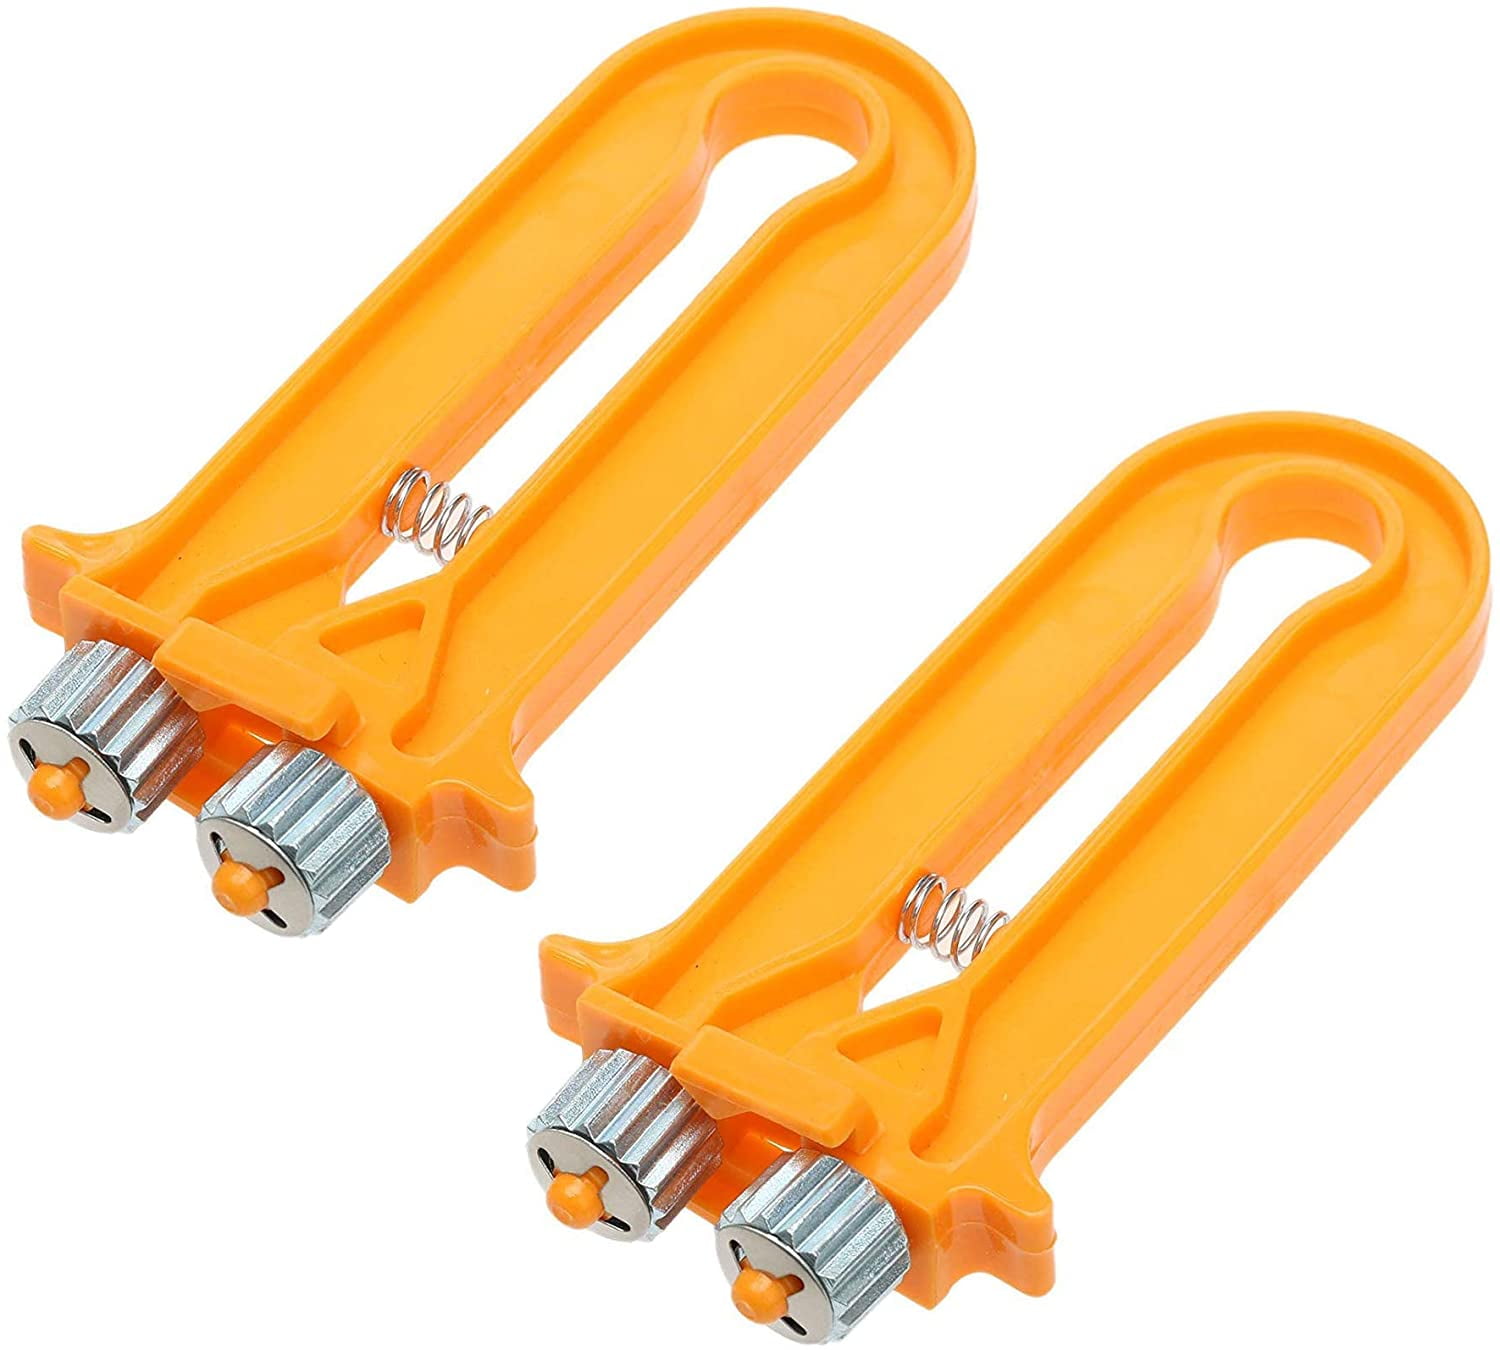 2PCS Bee Frame Wire Cable Tensioner Crimper Crimping Hive Beekeeping Equipment 